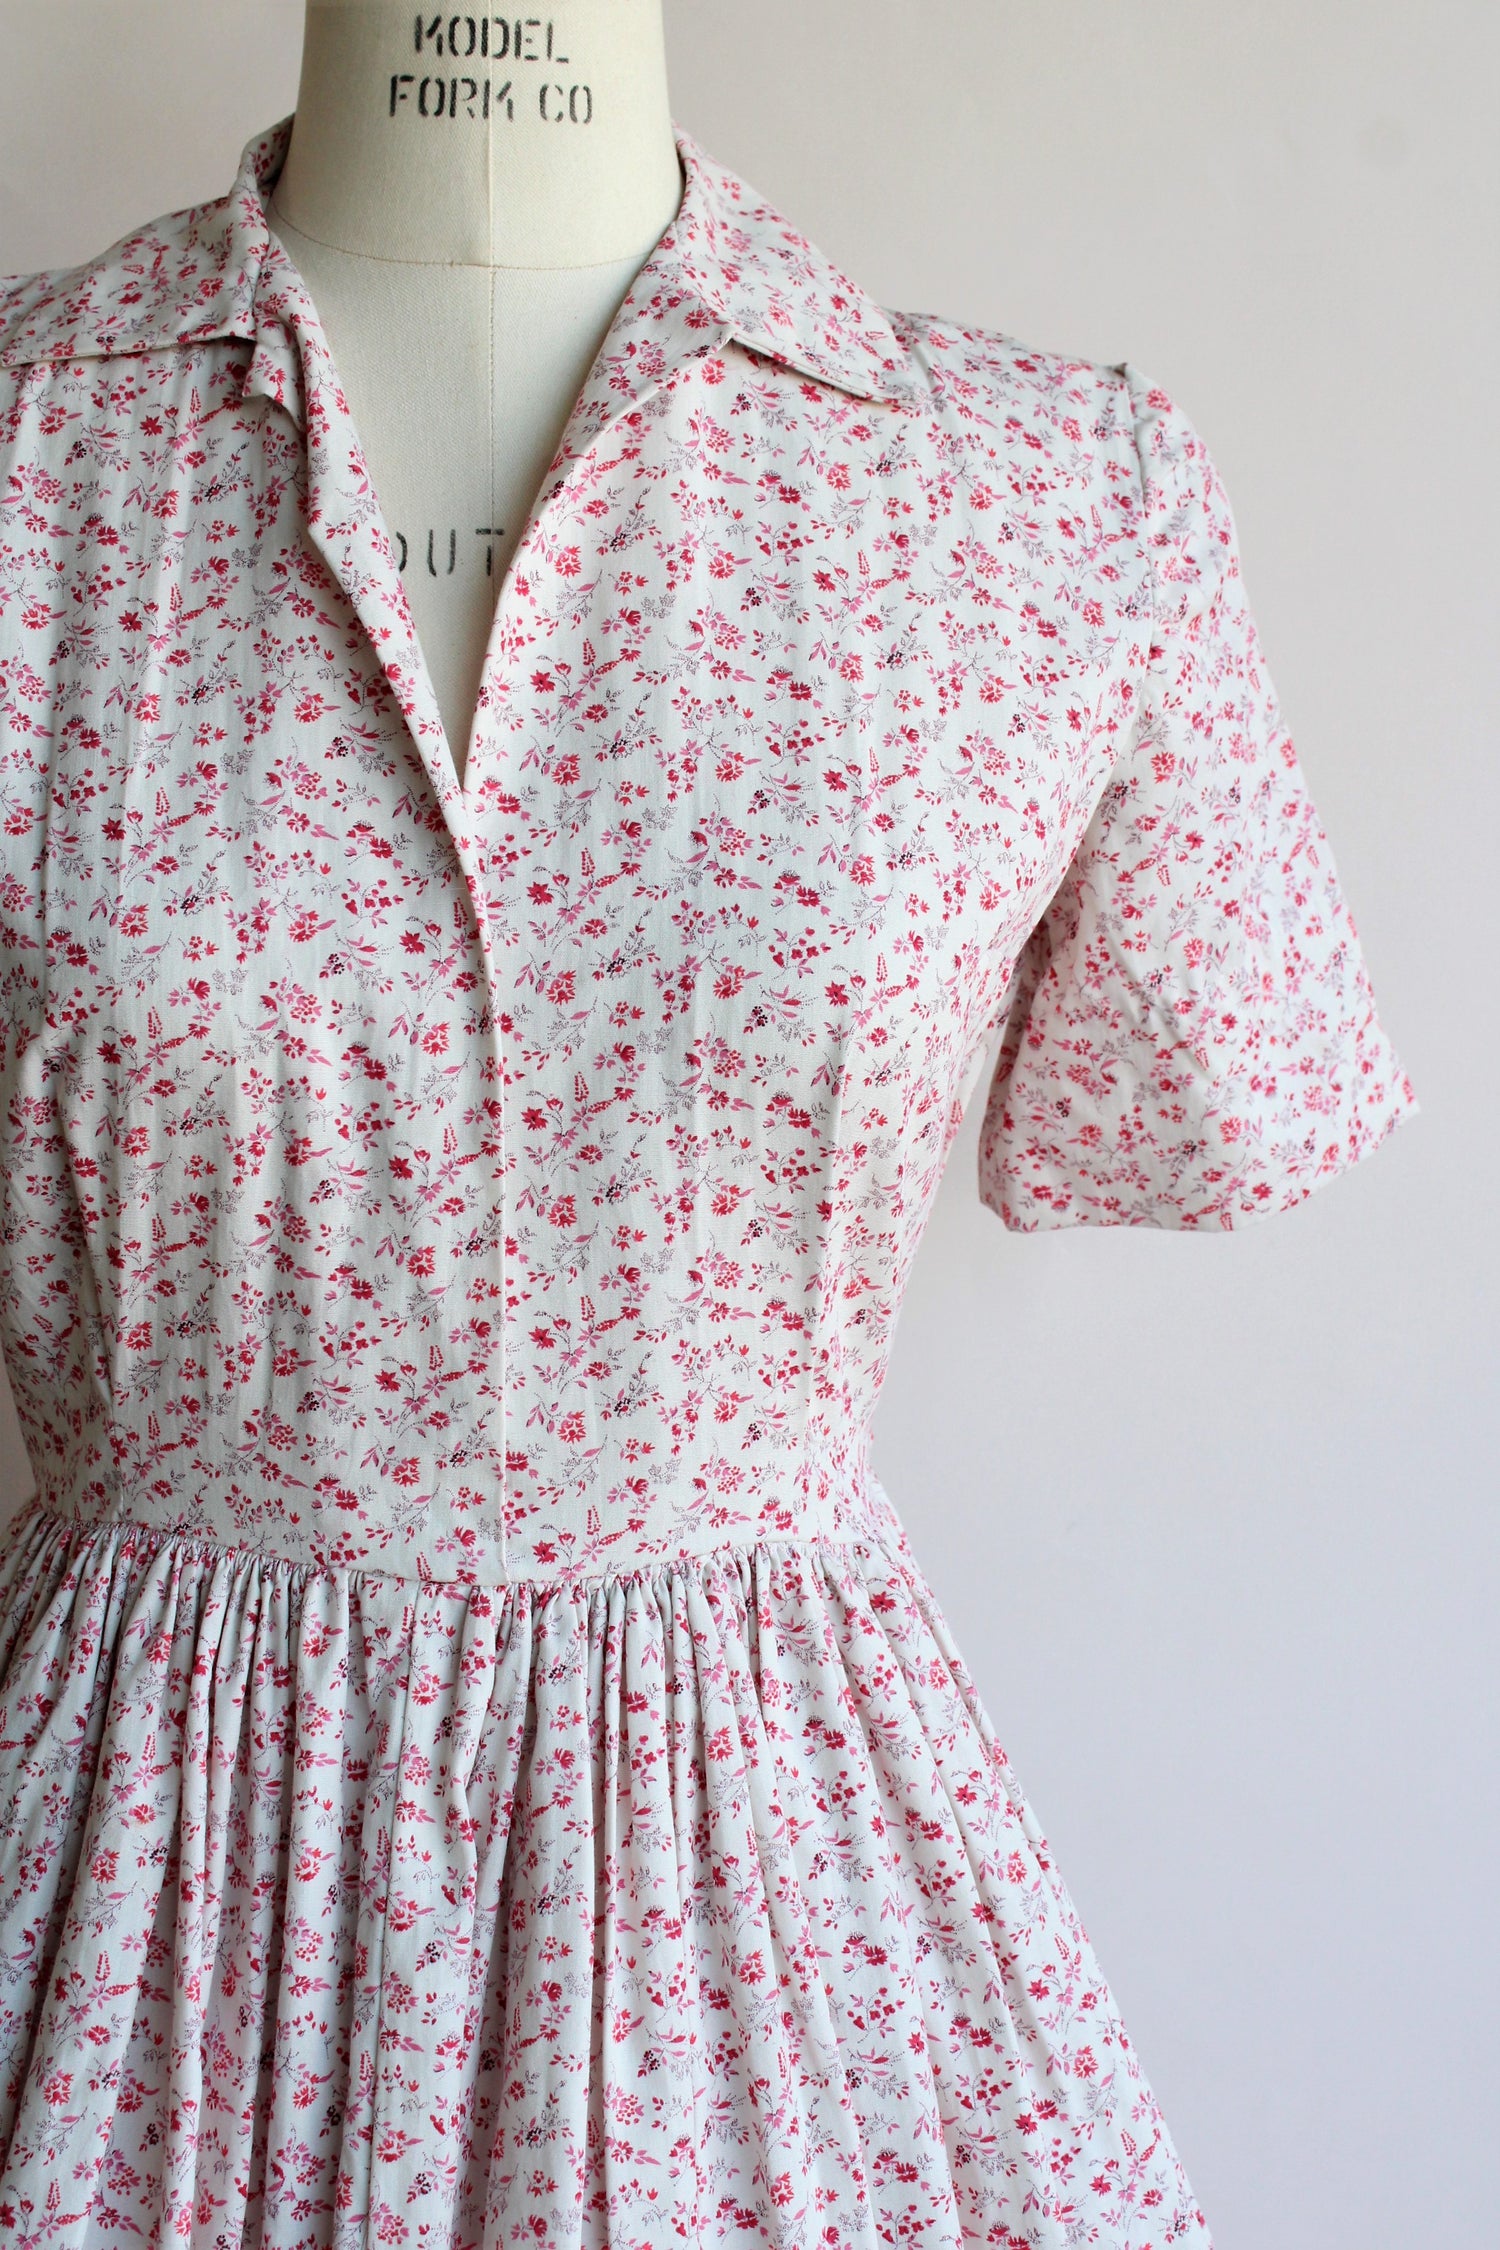 Vintage 1950s Fit and Flare Floral Print Cotton Dress